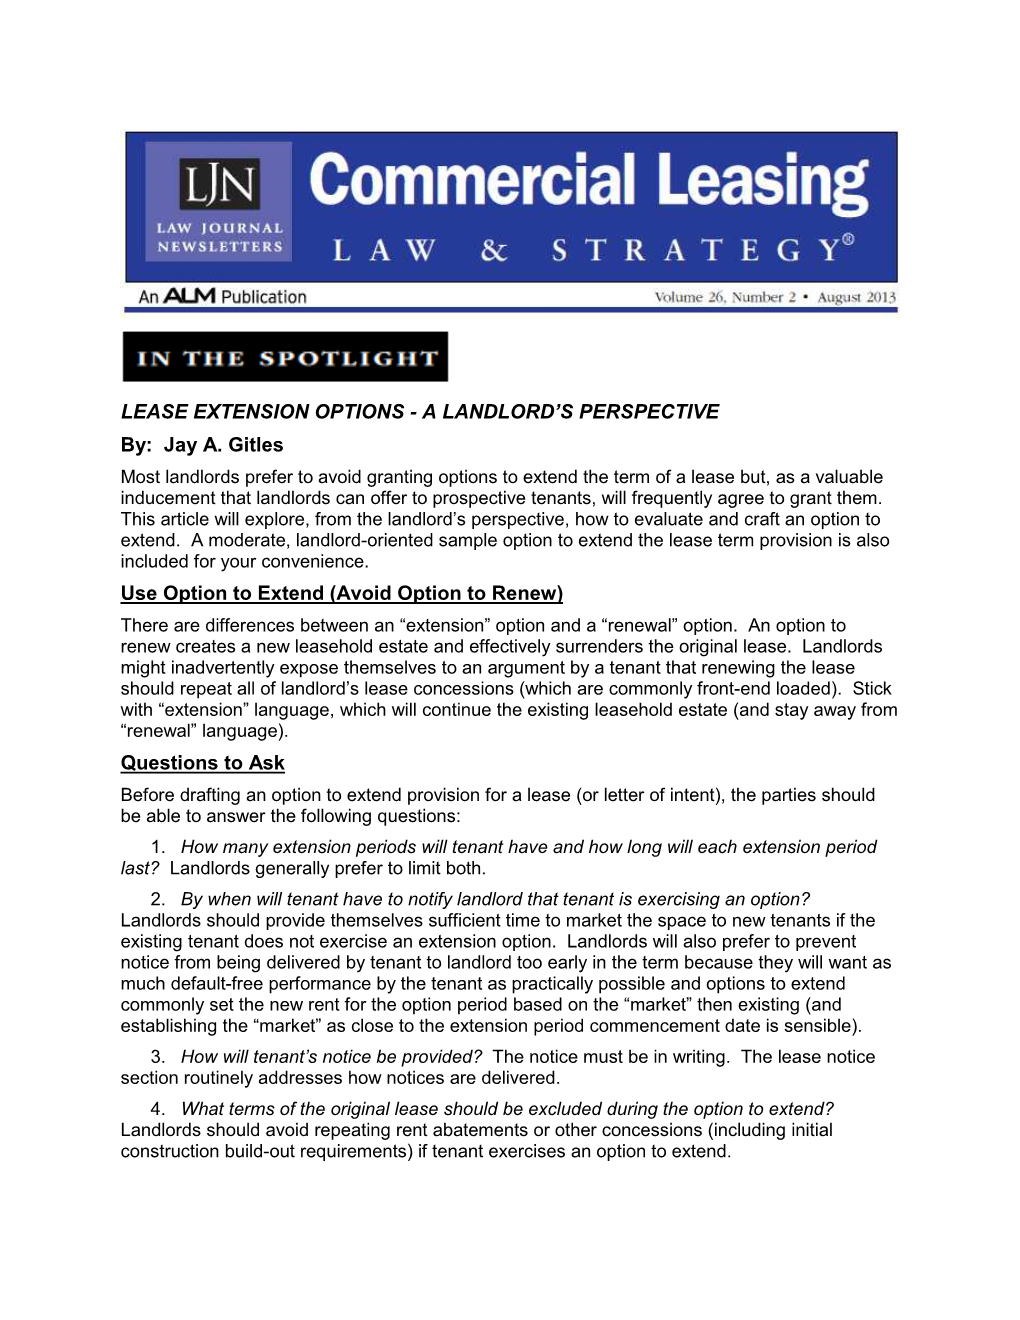 LEASE EXTENSION OPTIONS - a LANDLORD’S PERSPECTIVE By: Jay A